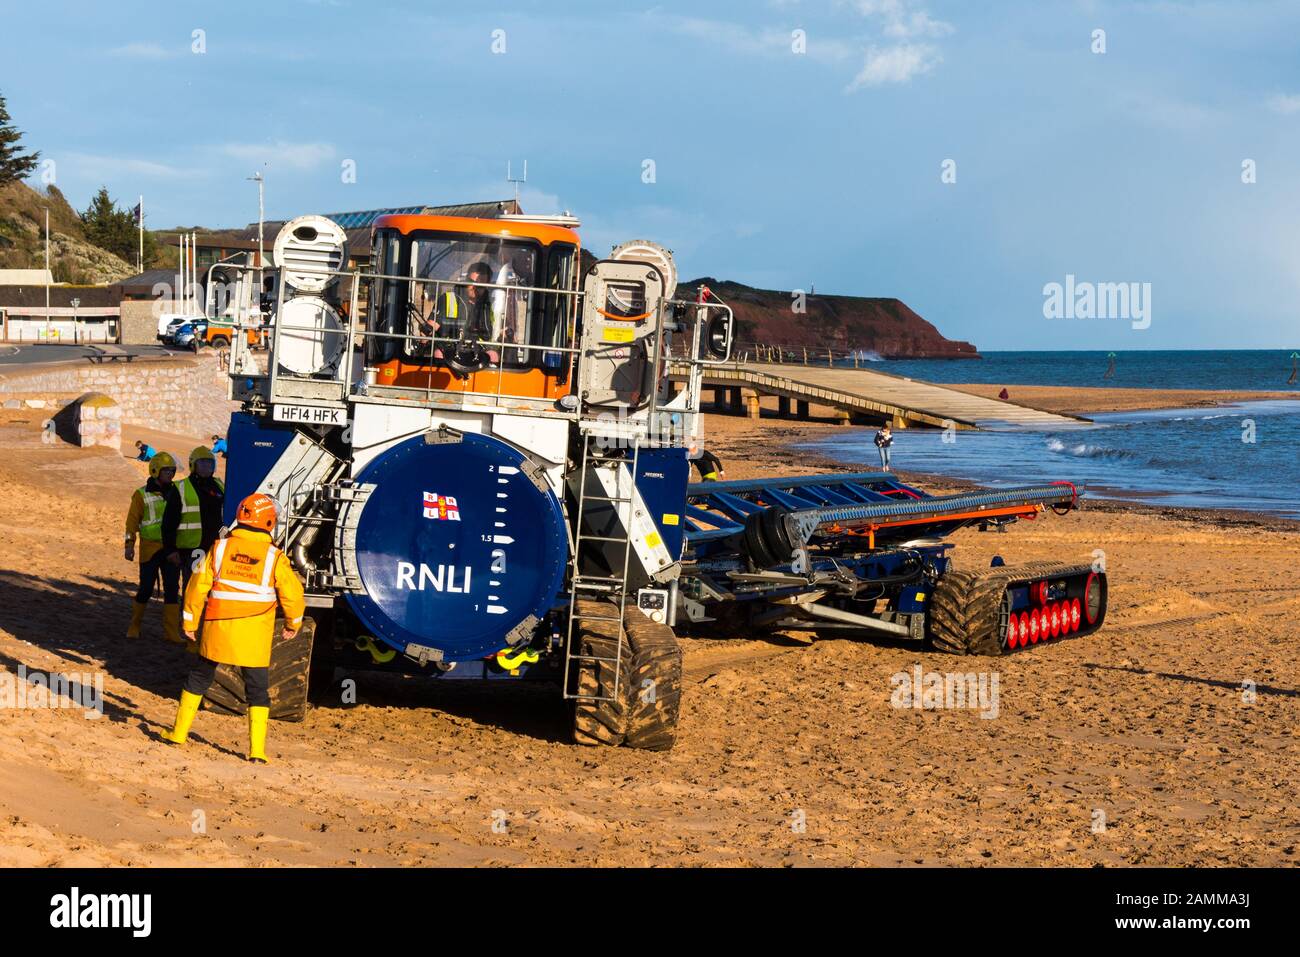 EXMOUTH, DEVON, UK - 3APR2019:  The Supacat Launch and Recovery Vehicle used with the RNLB R & J Welburn, a Shannon Class lifeboat. Stock Photo